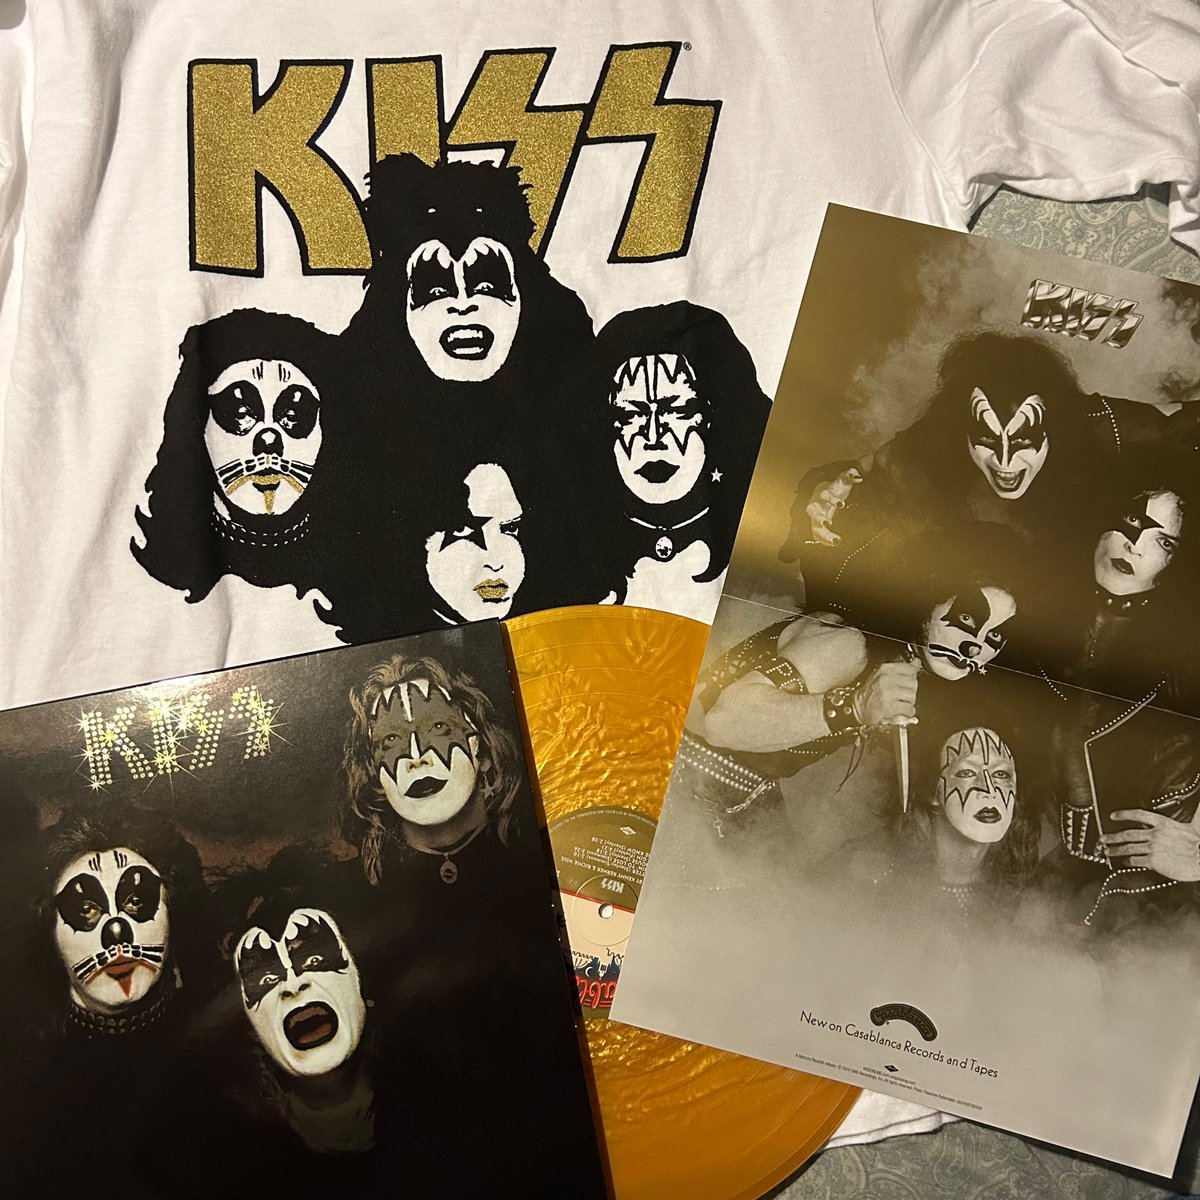 My 50th anniversary KISS debut package came in recently! The gold nugget vinyl is gorgeous, foil cover looks deluxe and the inclusion of the promo poster is stunning. 

#kissband #50thanniversary #genesimmons #paulstanley #acefrehley #petercriss